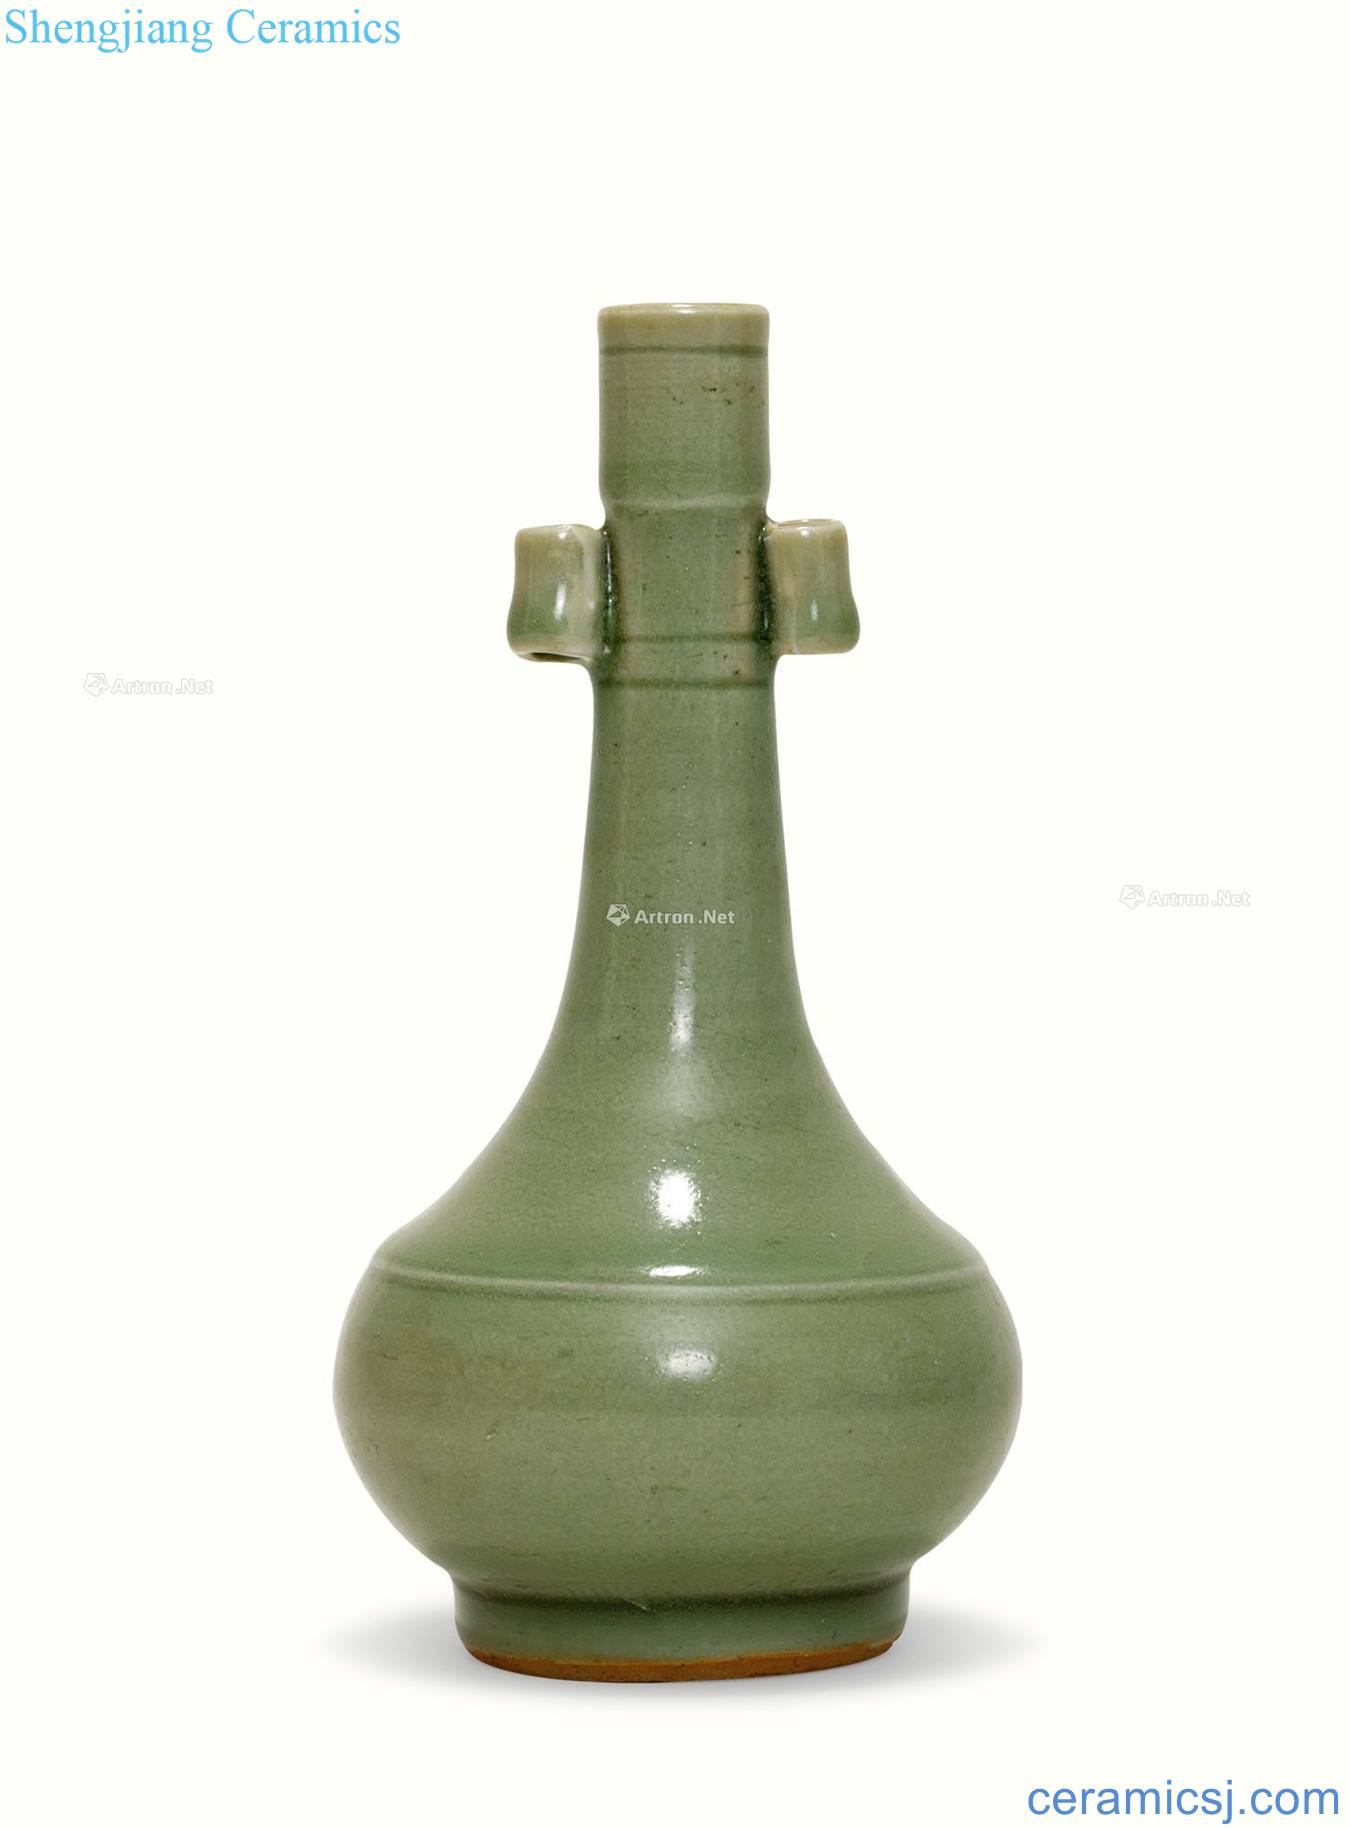 And the early yuan dynasty Longquan green glaze vase with a long neck injection